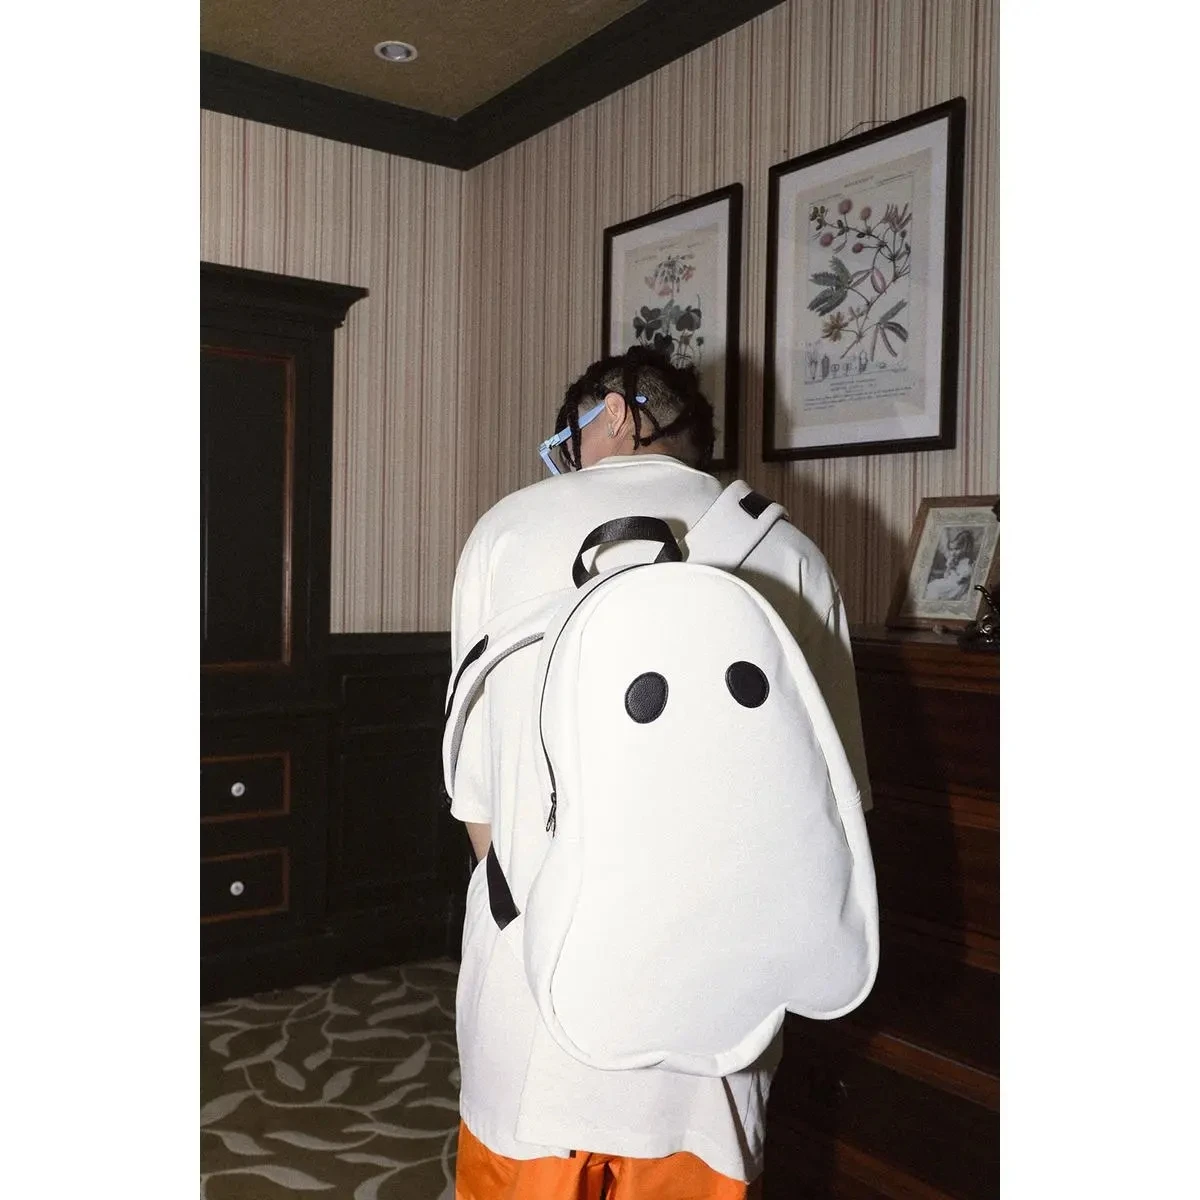 

JOY Original Design Ghost Ghost Backpack Personality PU Leather Student Schoolbag Large Capacity Travel Bag